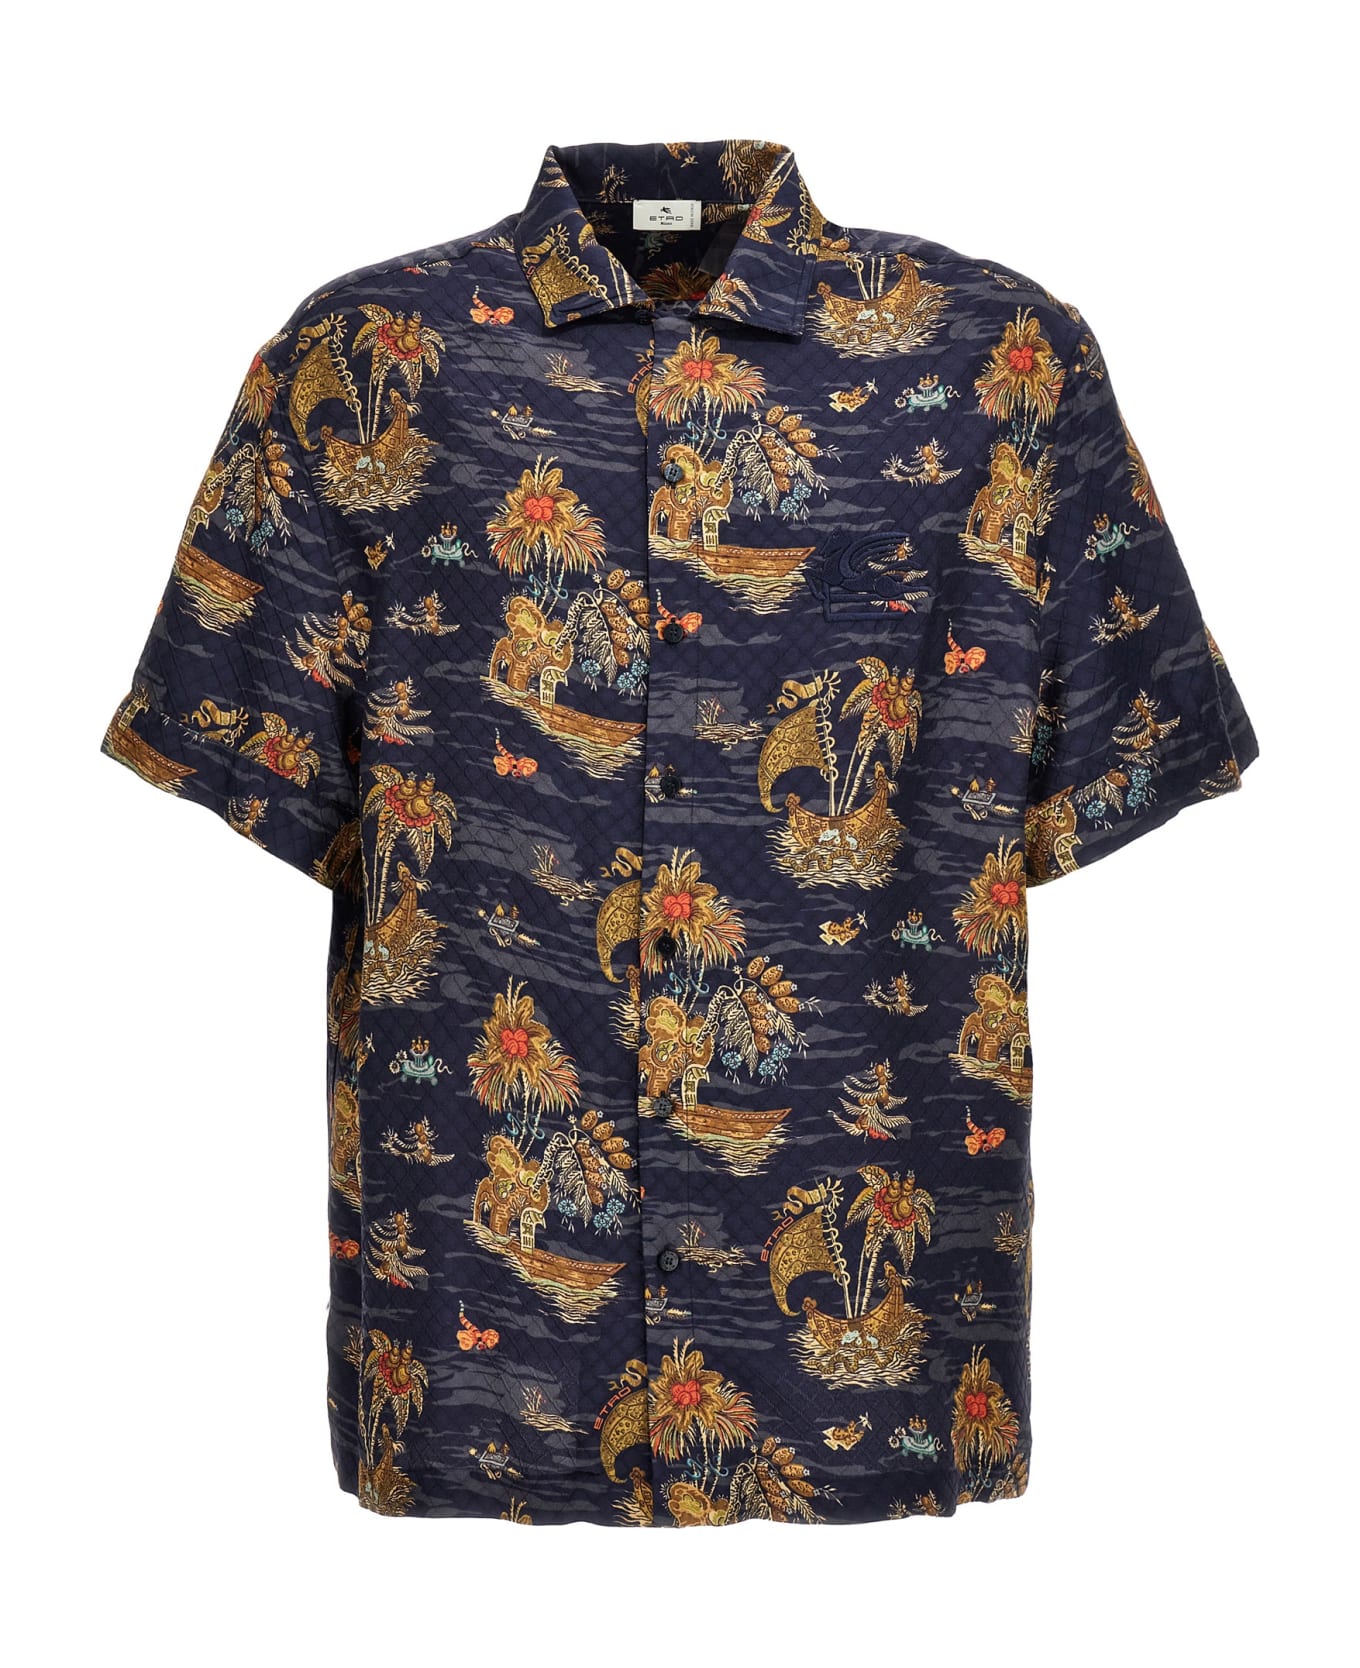 Etro Embroidered Logo Print Shirt - Multicolor